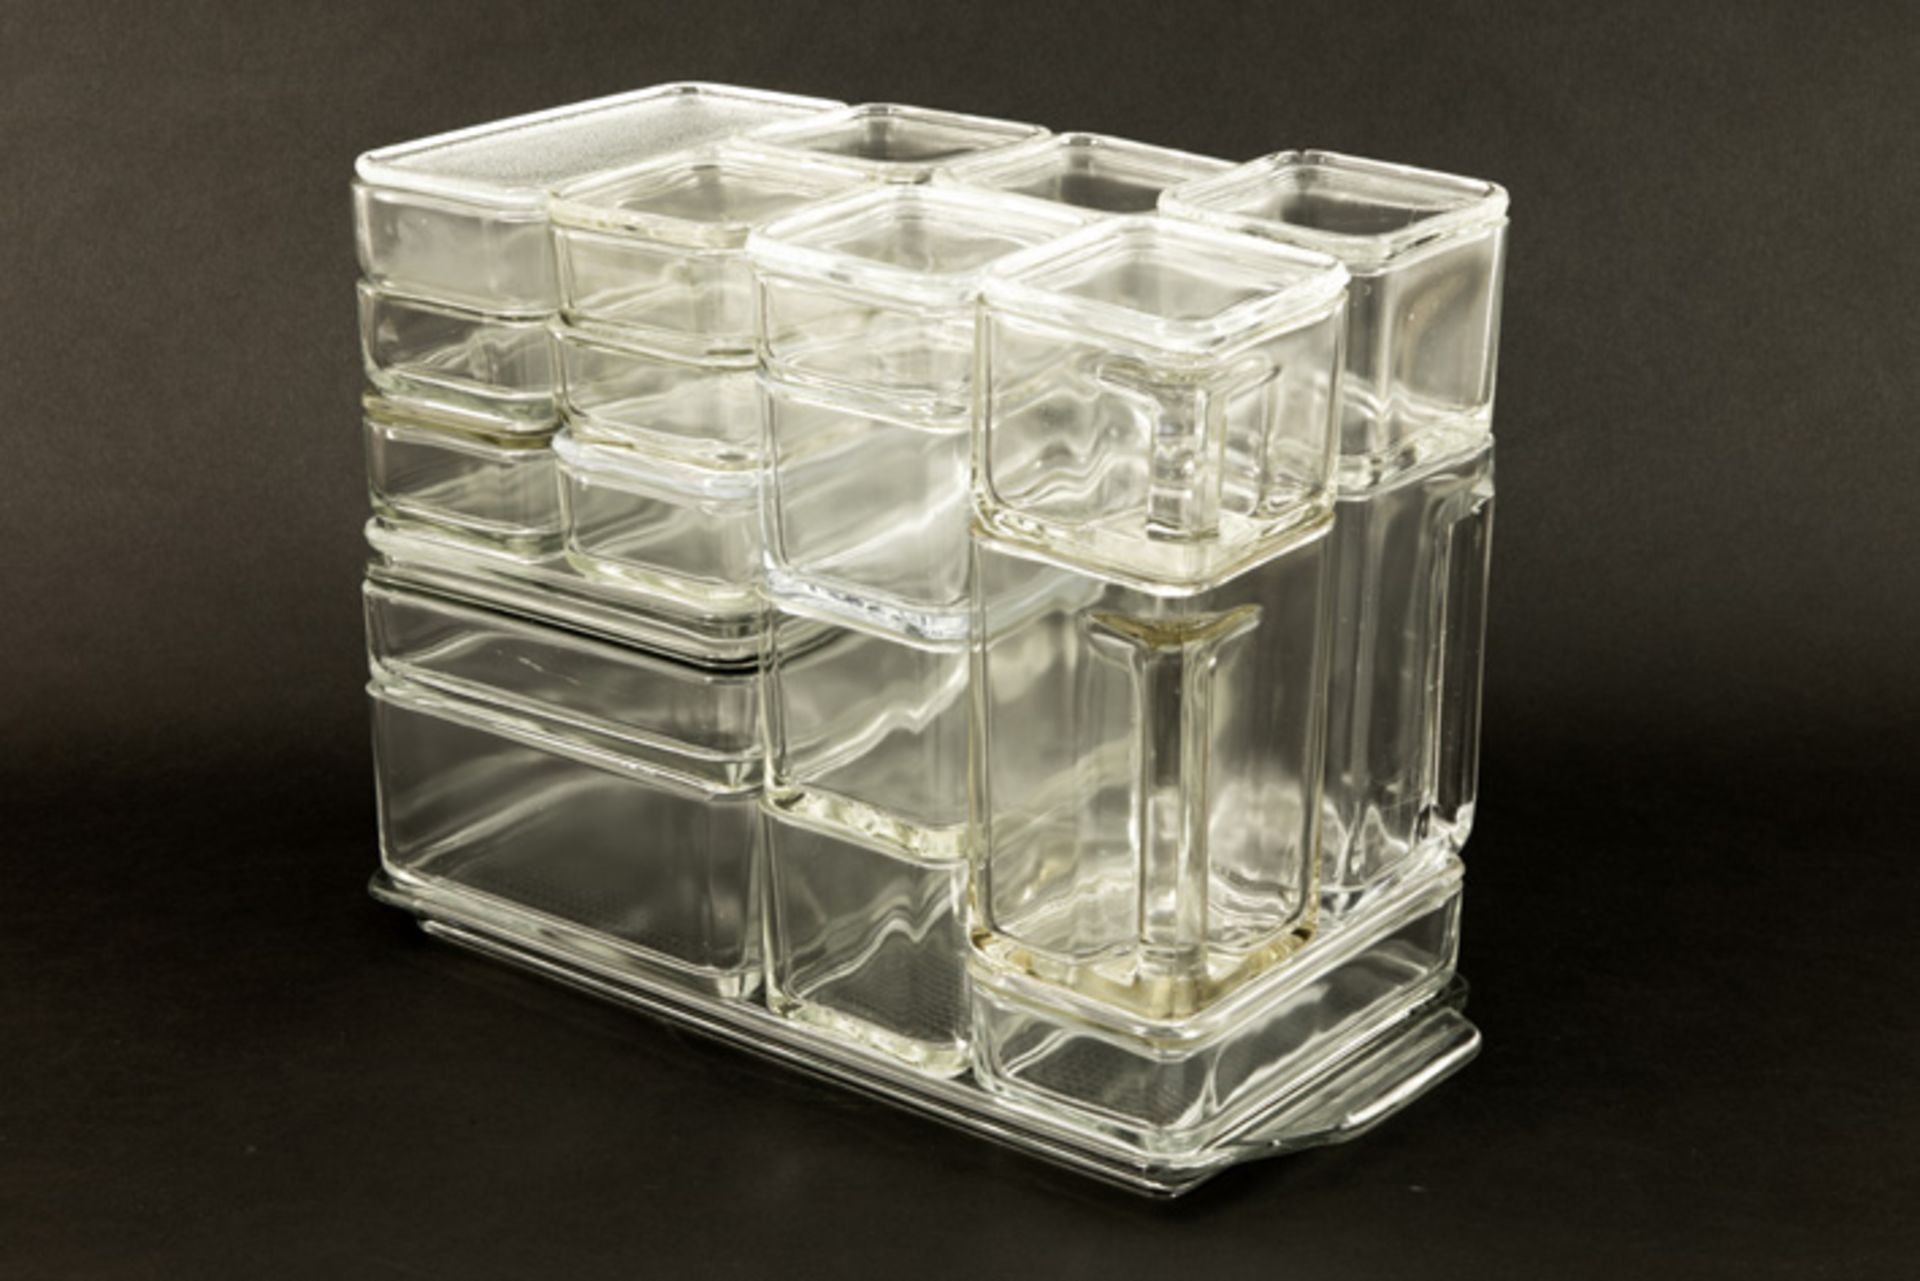 Wilhelm Wagenfeld "Kubus" stacking storage container set (21 pcs) with lidded boxes and a decanter - Image 4 of 5